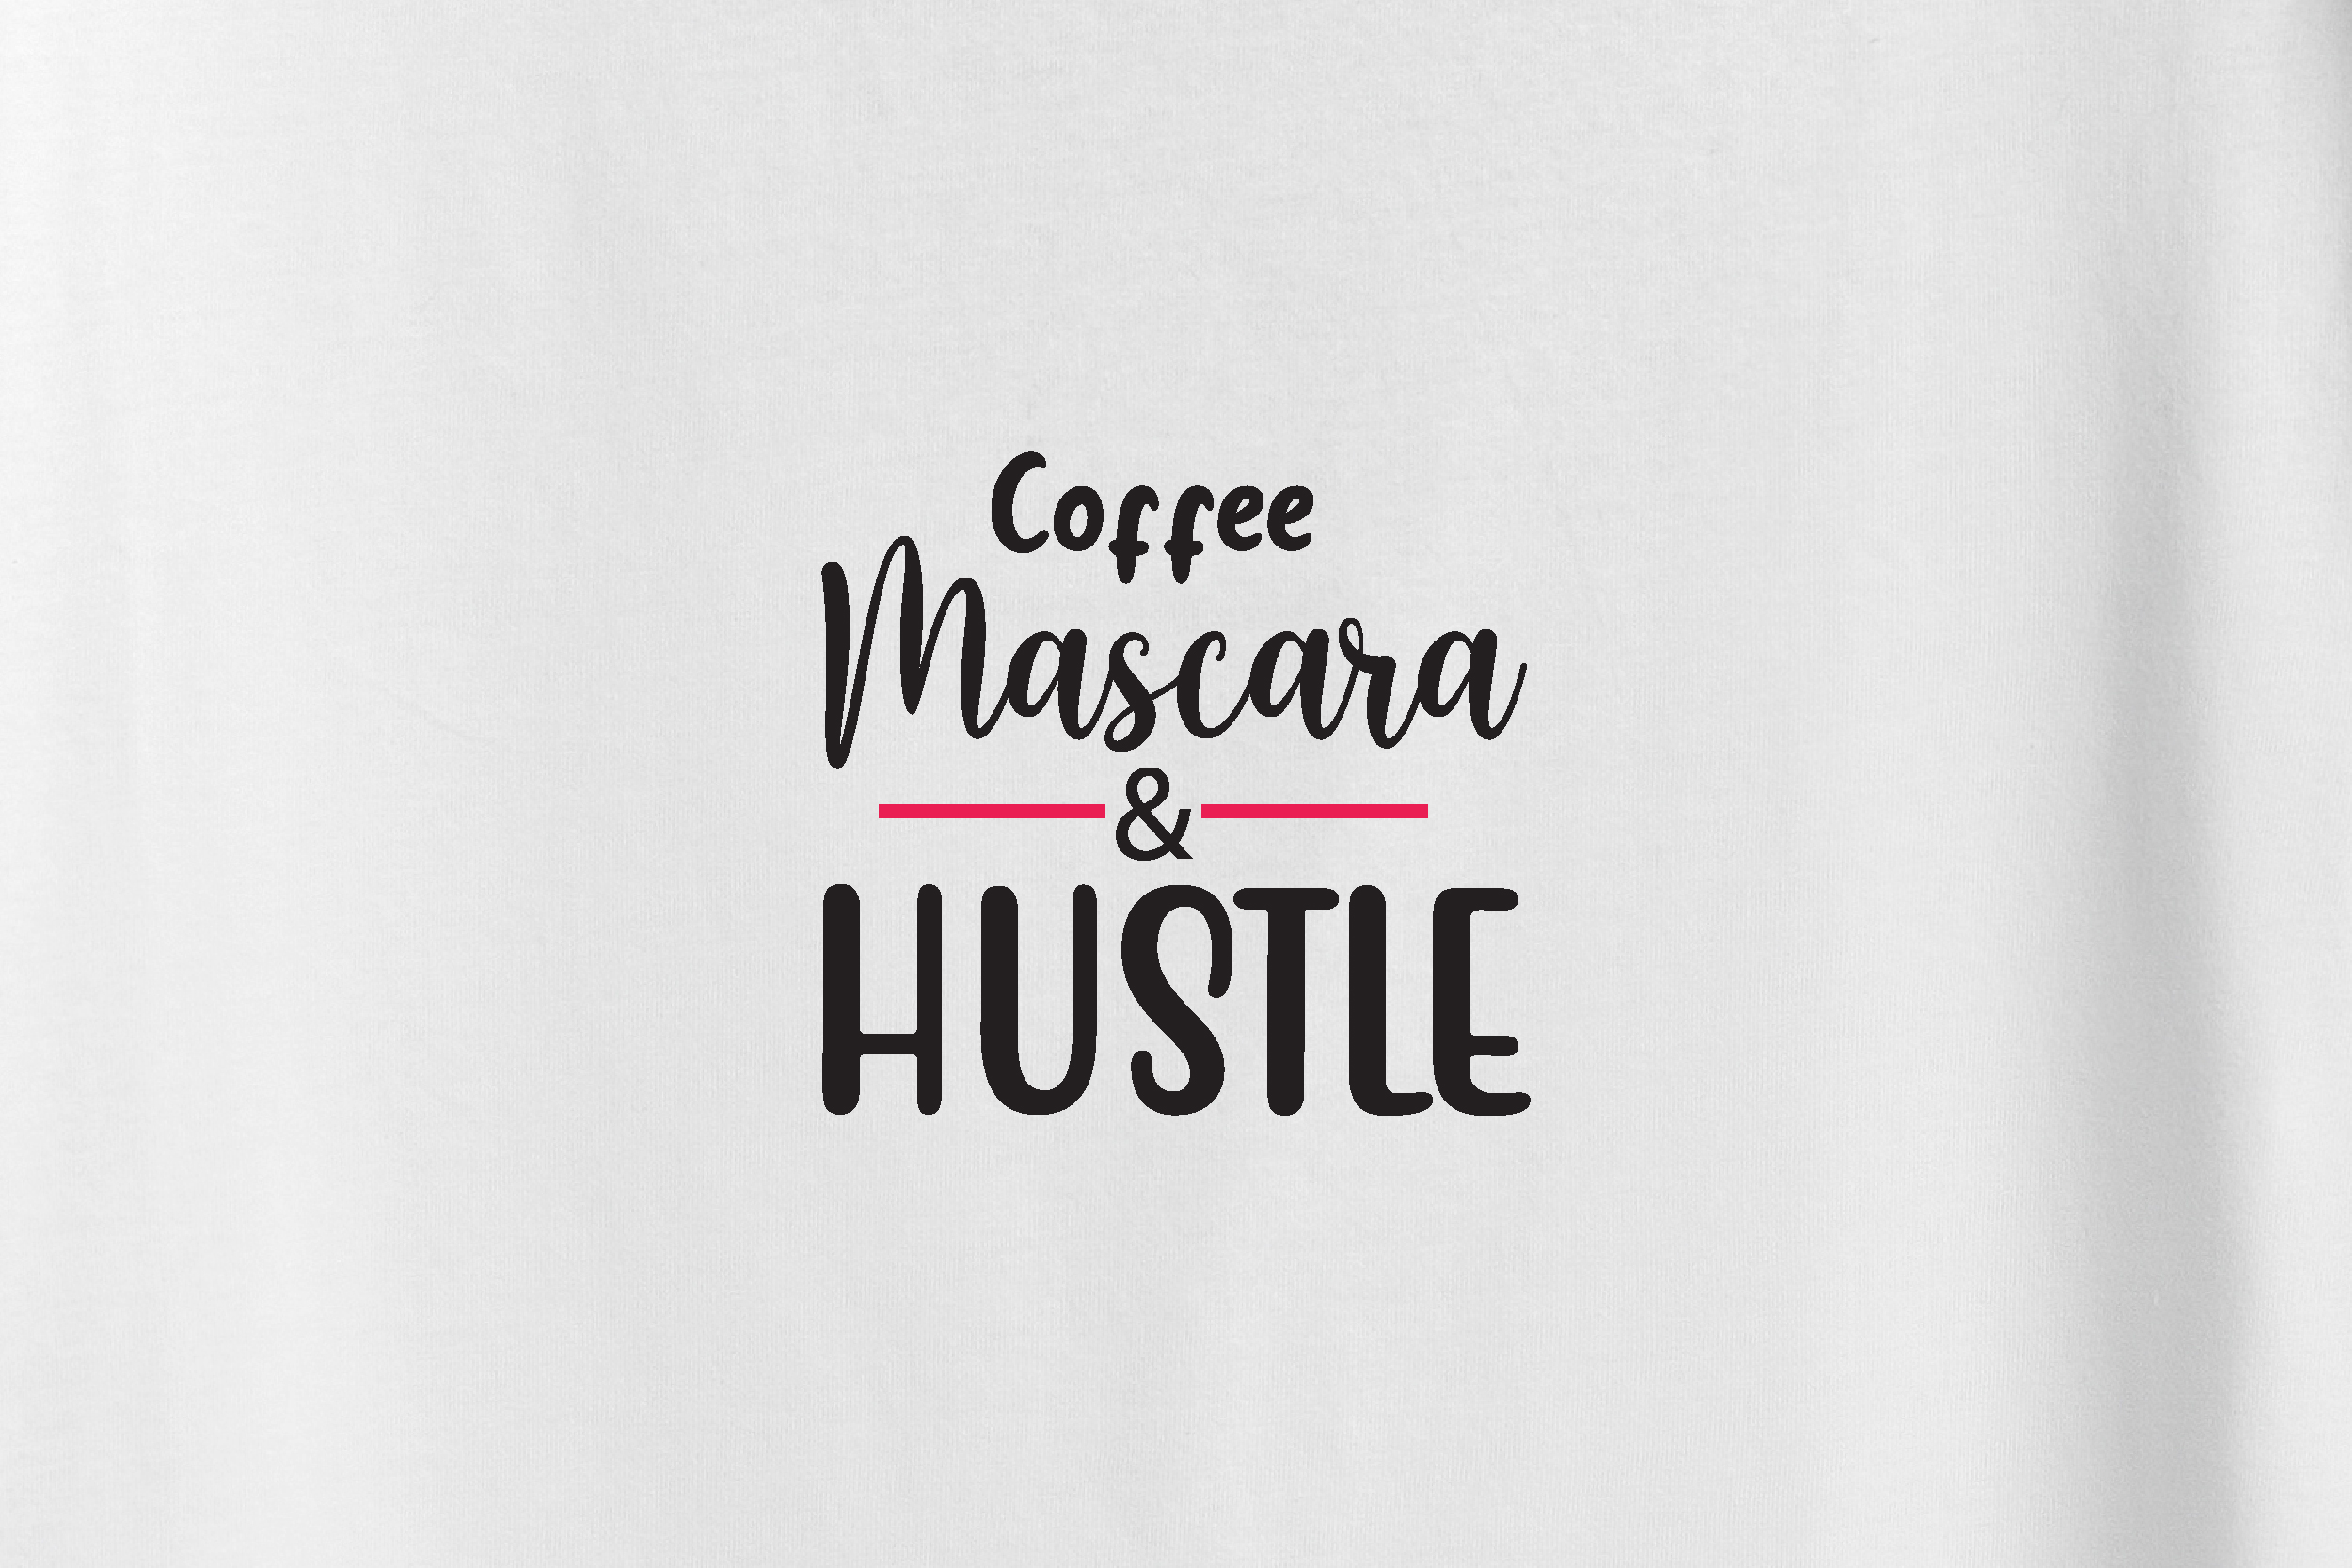 Download Coffee Mascara Hustle Graphic By Creative Store Net Creative Fabrica